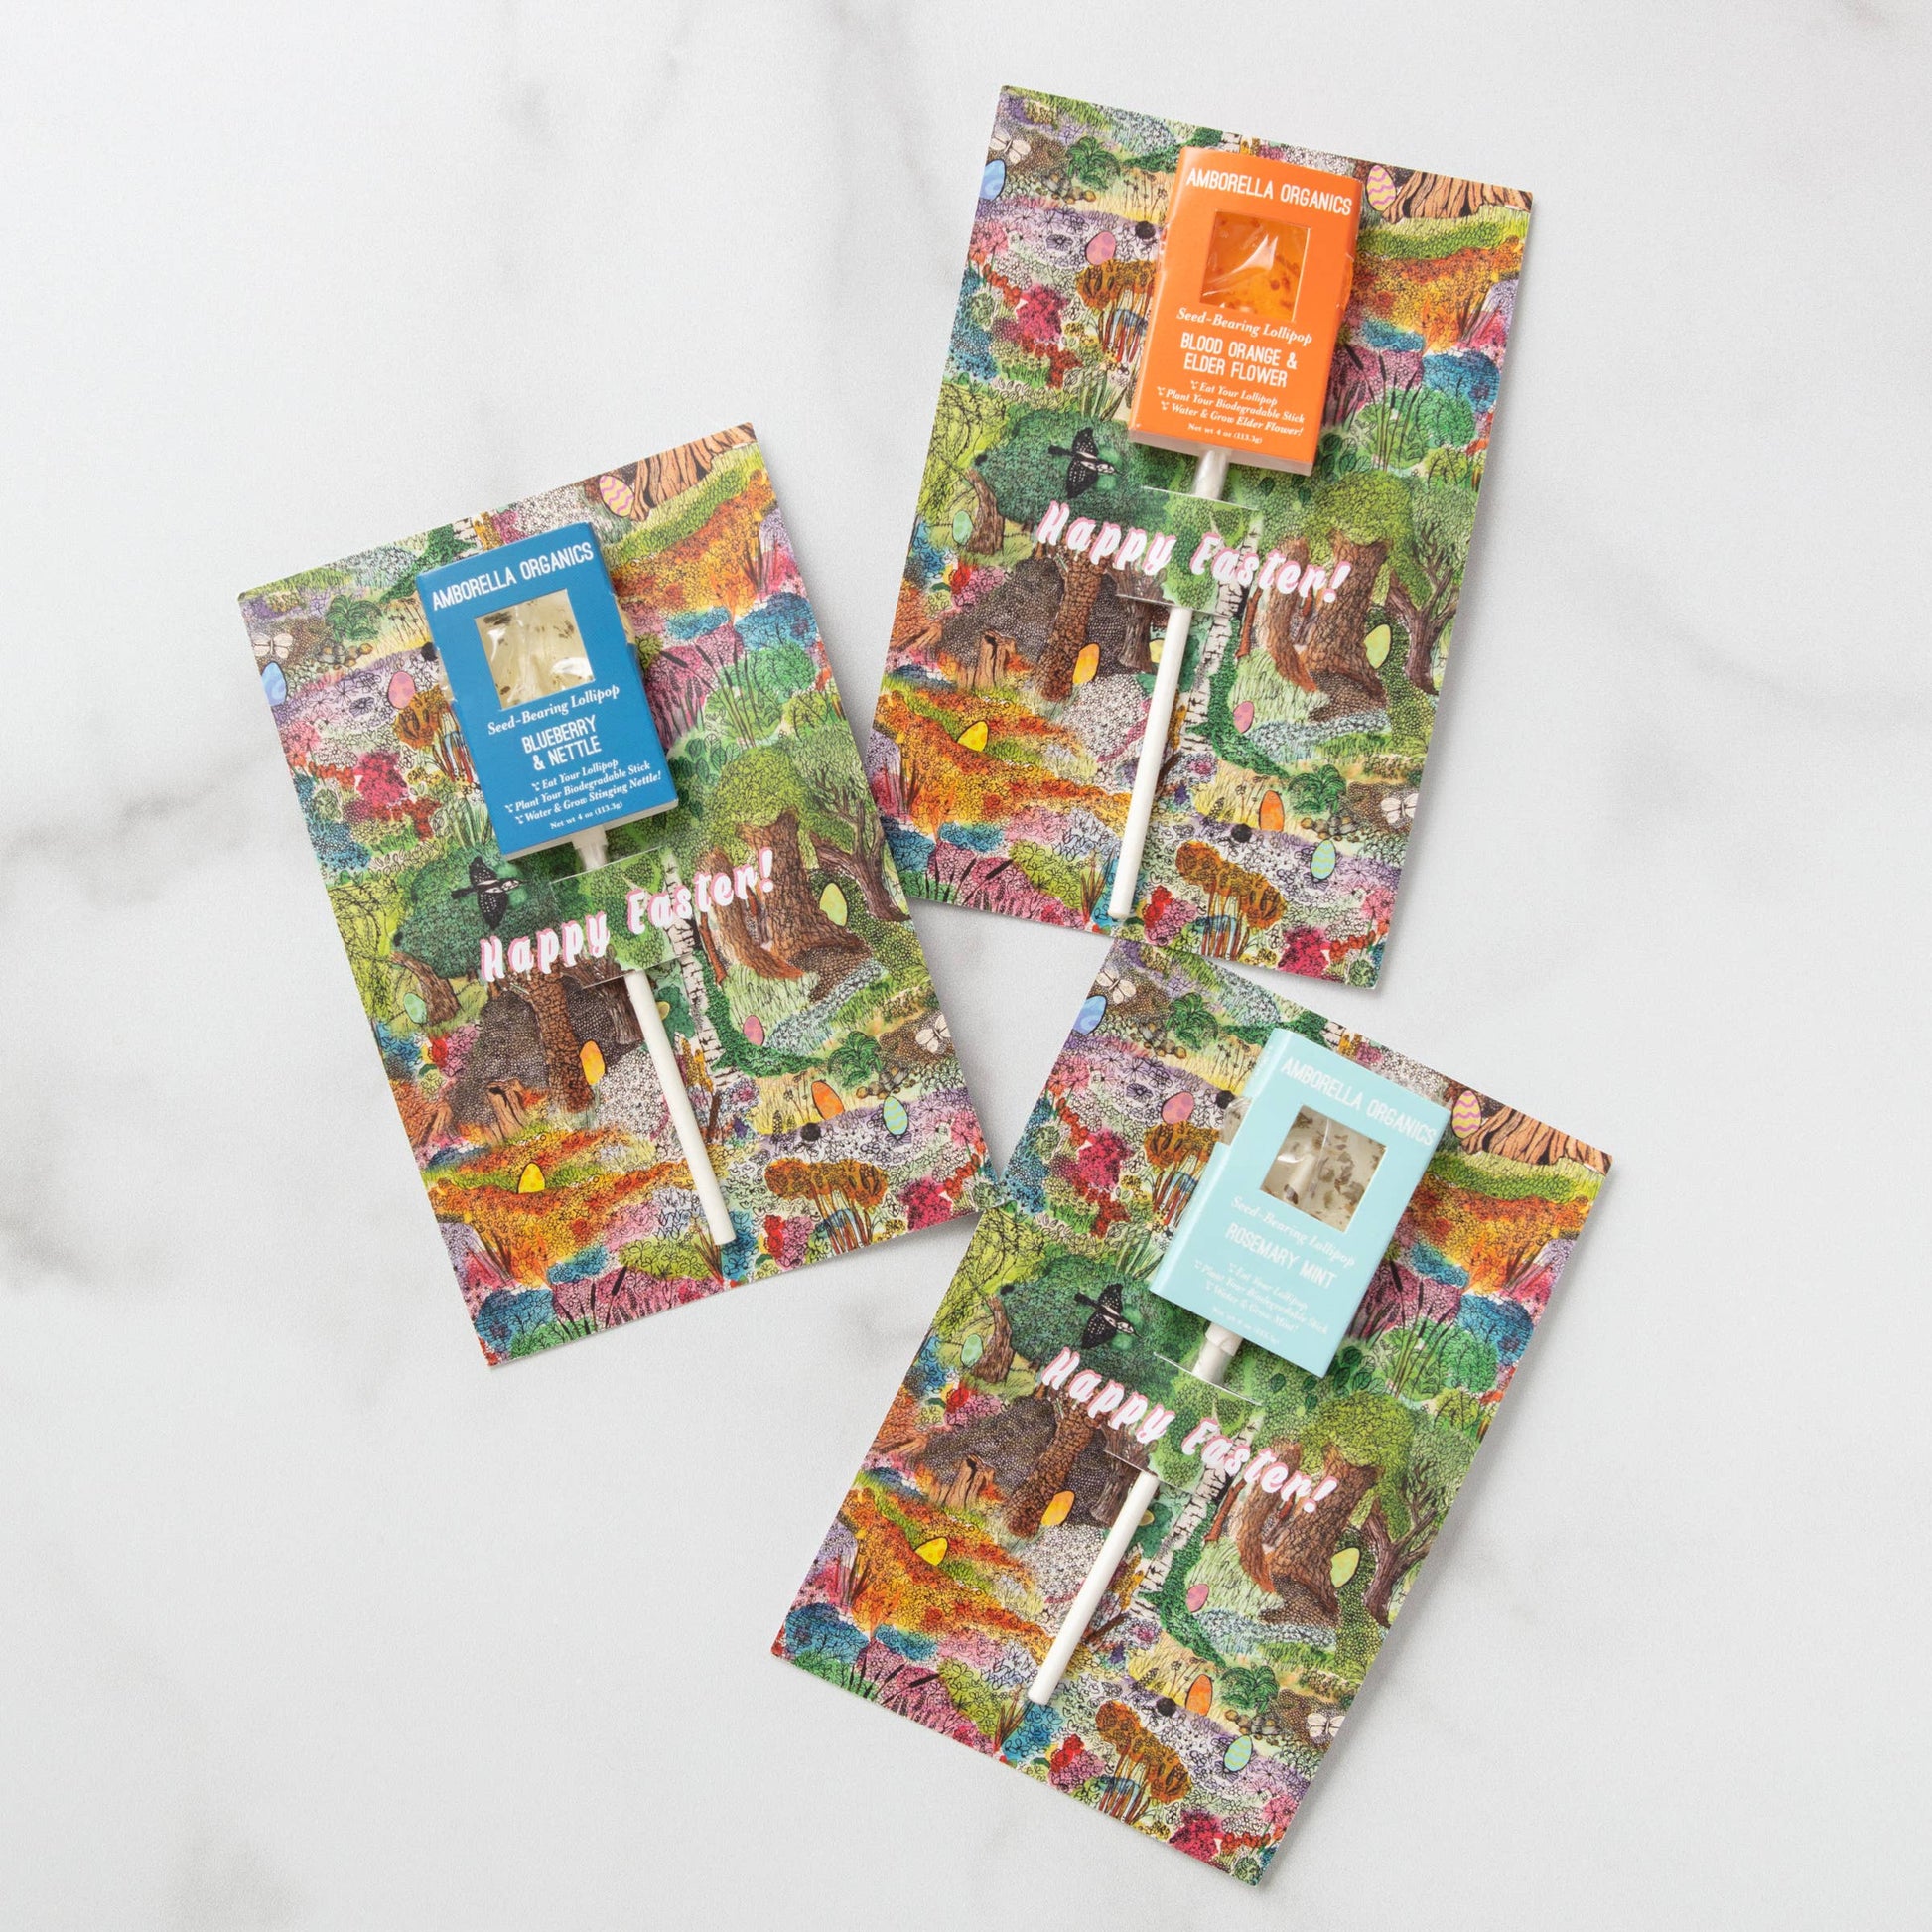 Amborella Organics - Easter Cards with Organic Lollipops (Eat, Plant, Grow)  Amborella Organics   -better made easy-eco-friendly-sustainable-gifting